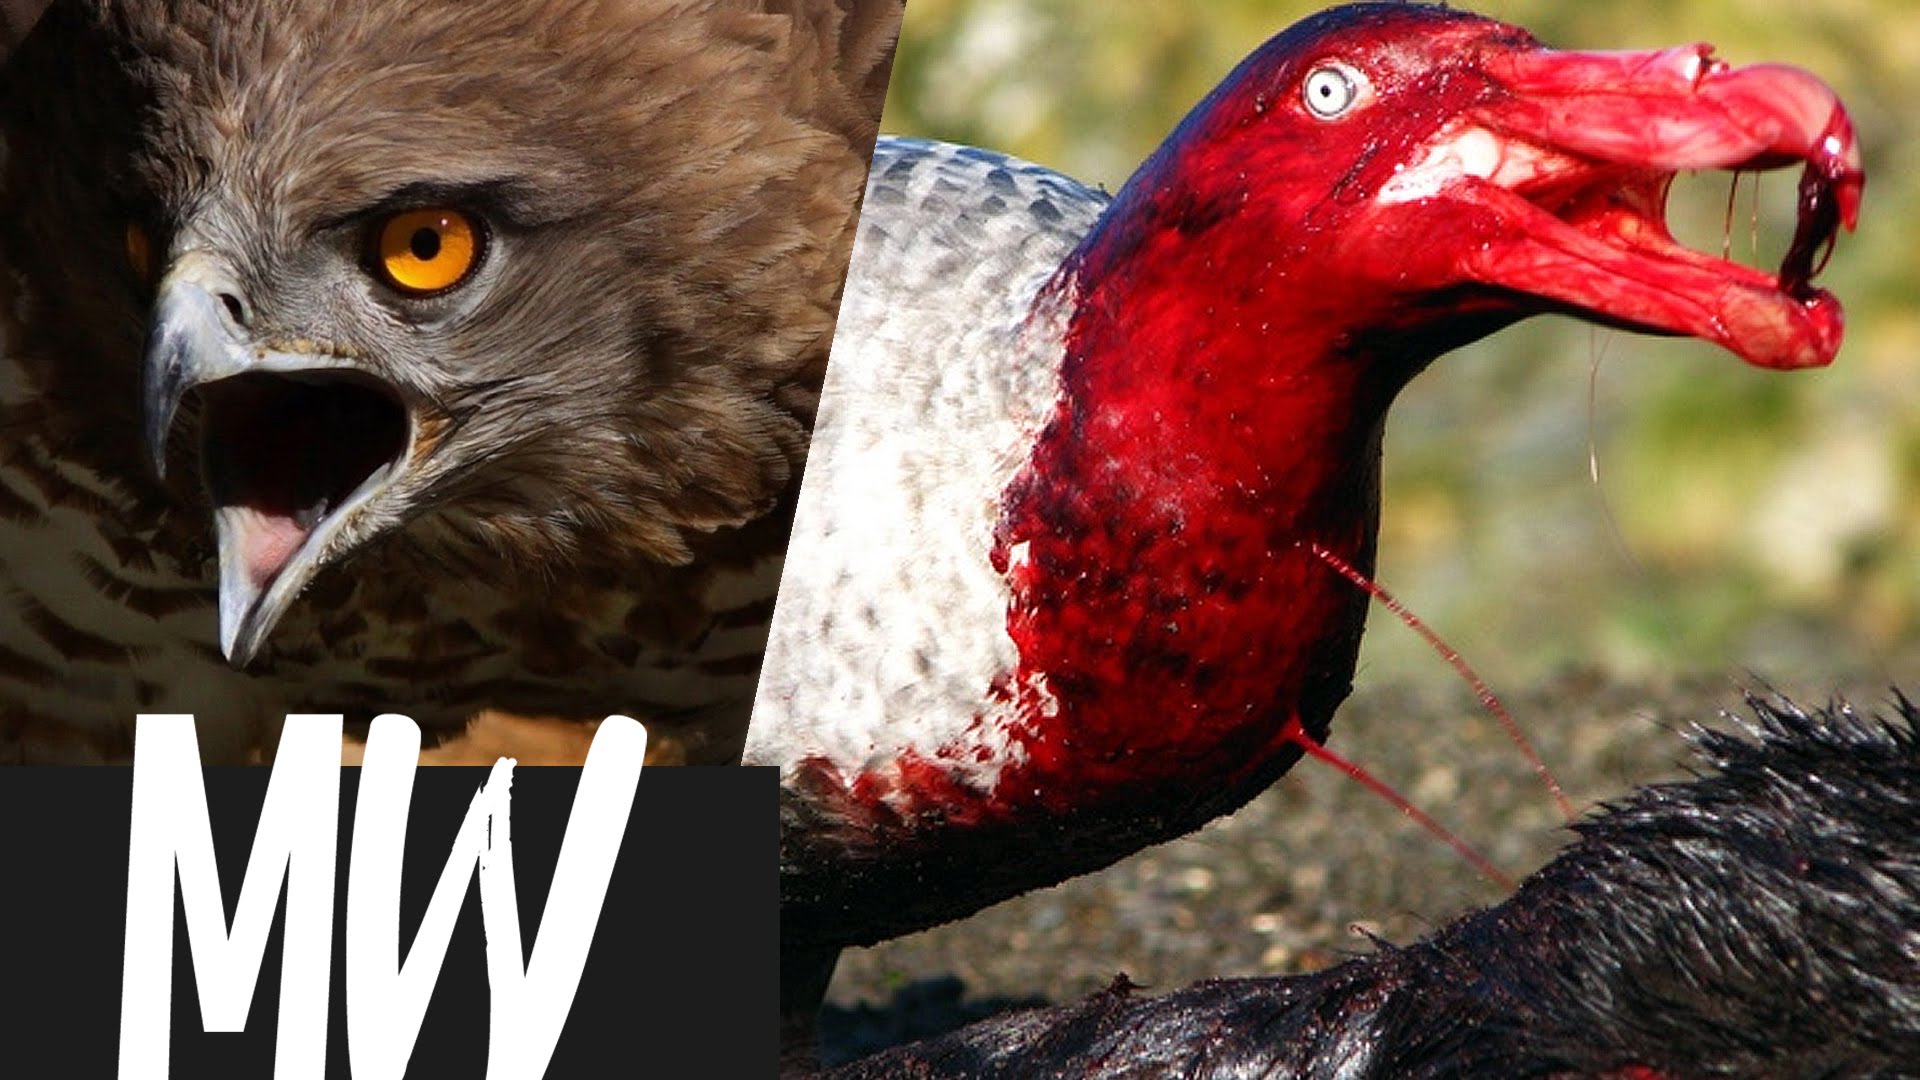 Top 10 Most Blood-Thirsty Birds - YouTube